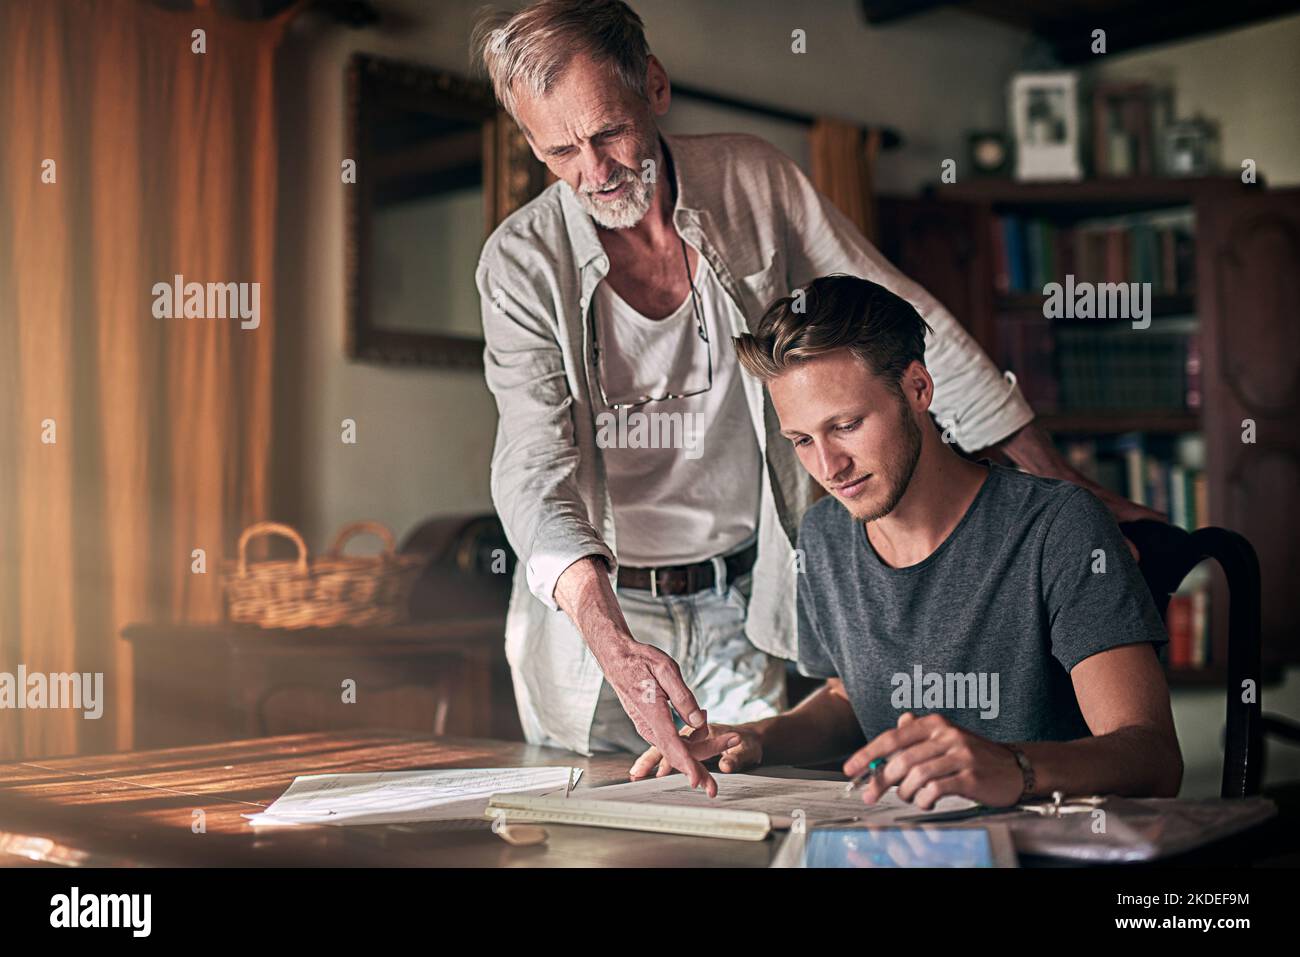 Keeping their business in the family. a father and his son working on a design for their family business at home. Stock Photo